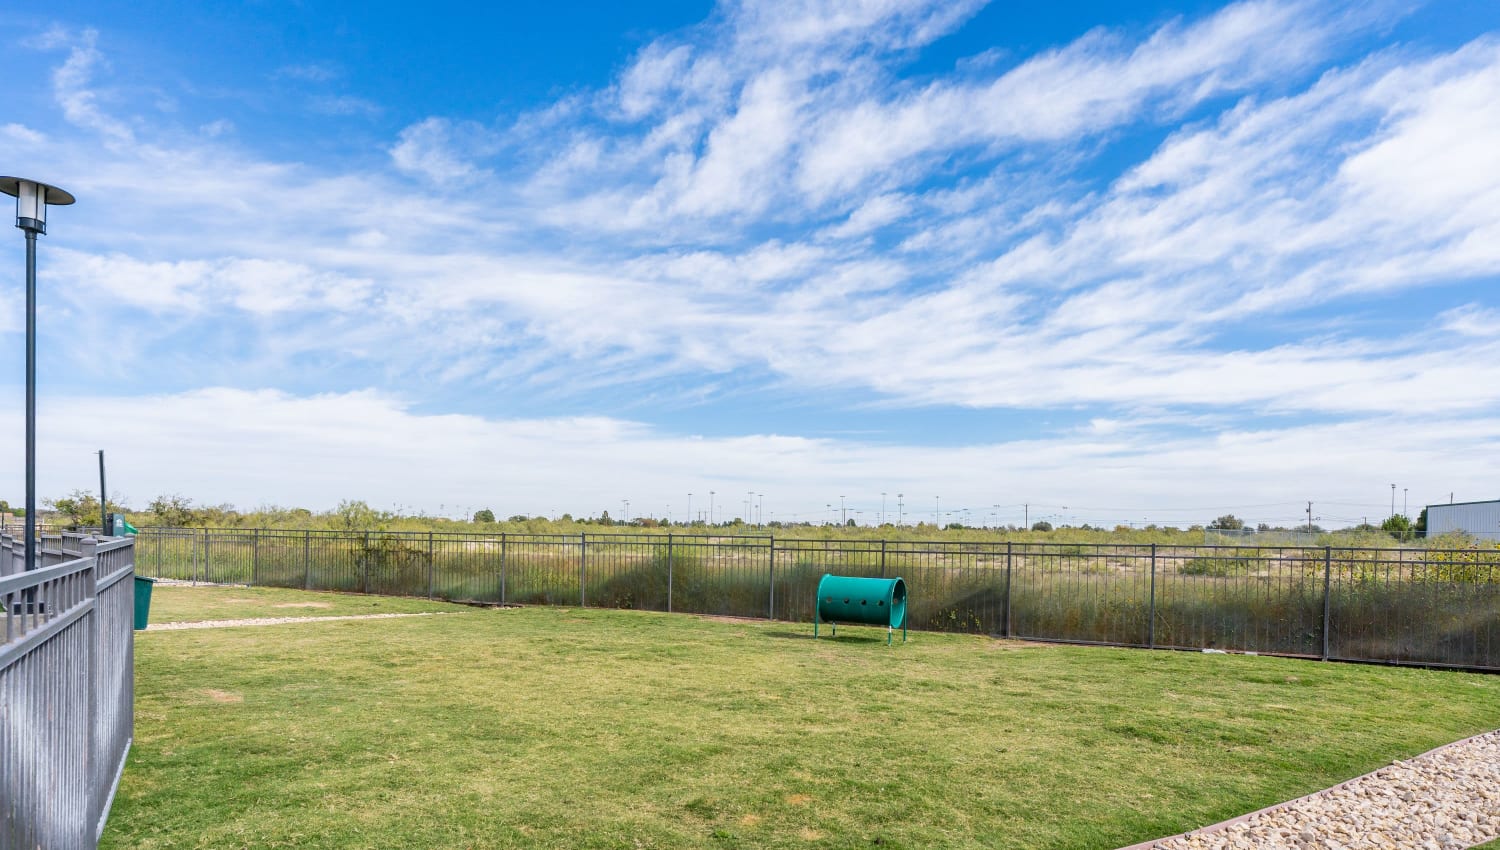 Exterior dog play area at The Everett at Ally Village in Midland, Texas